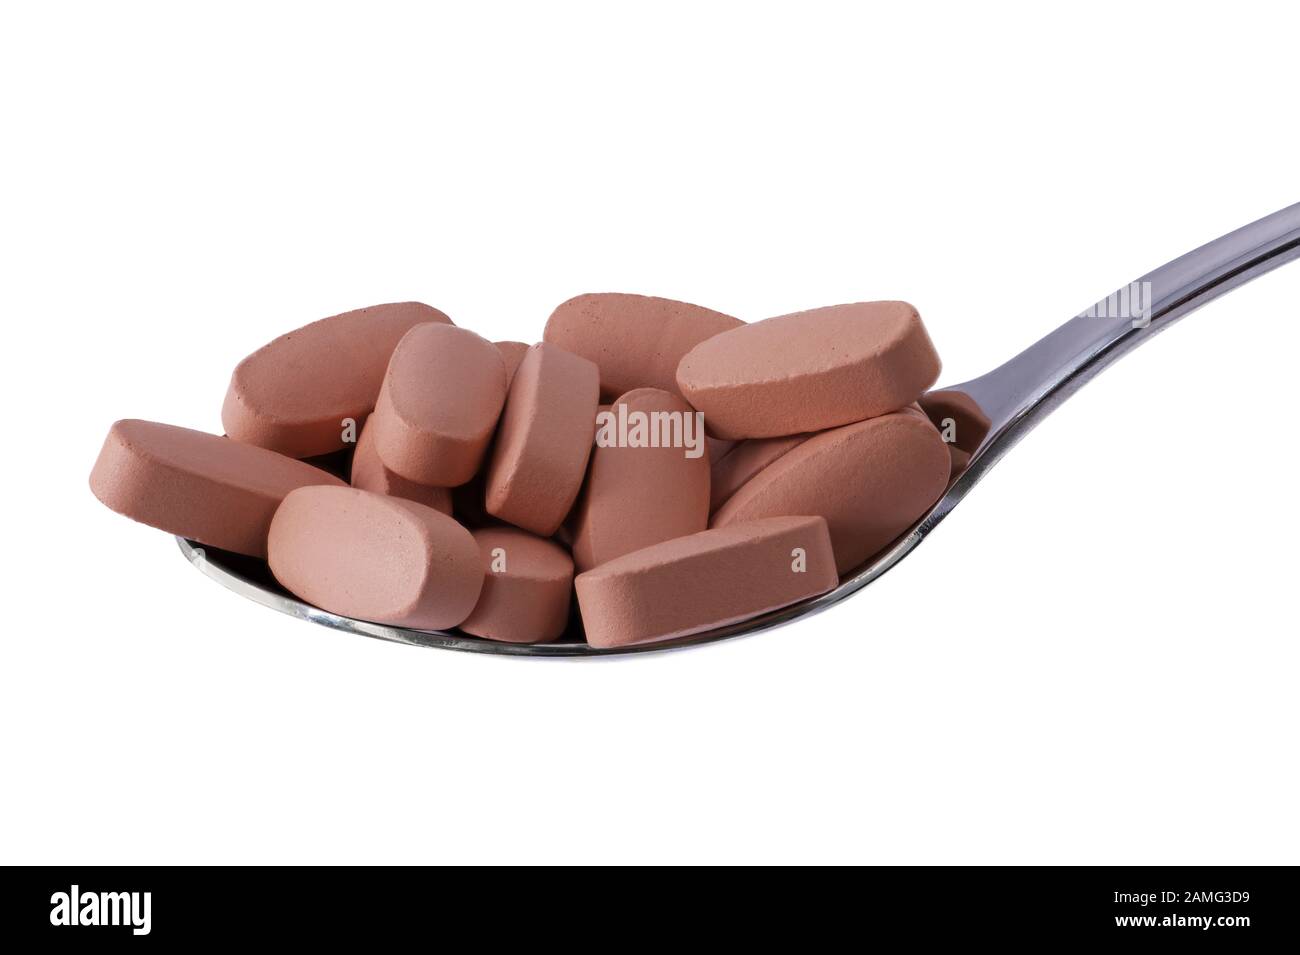 Vitamin pills on tablespoon isolated on white. Macro photography, food supplements. Concept for diet, health and nutrition. Stock Photo